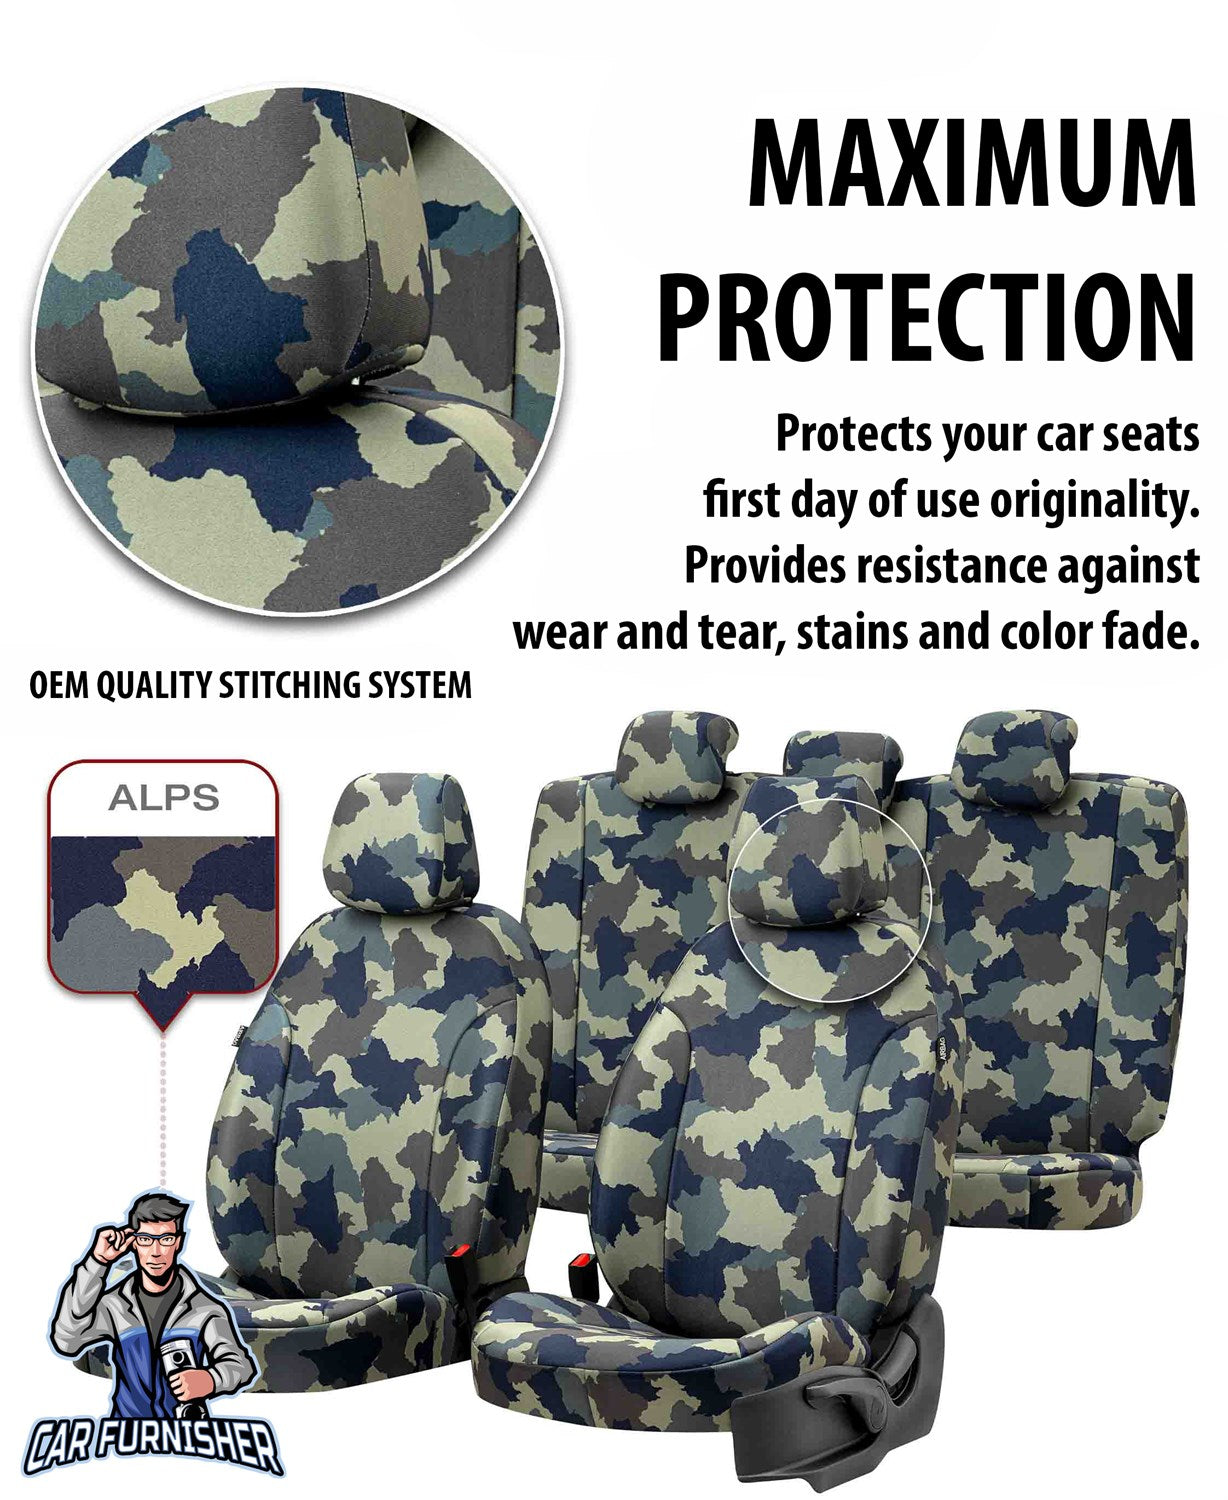 Ford Focus Seat Covers Camouflage Waterproof Design Montblanc Camo Waterproof Fabric